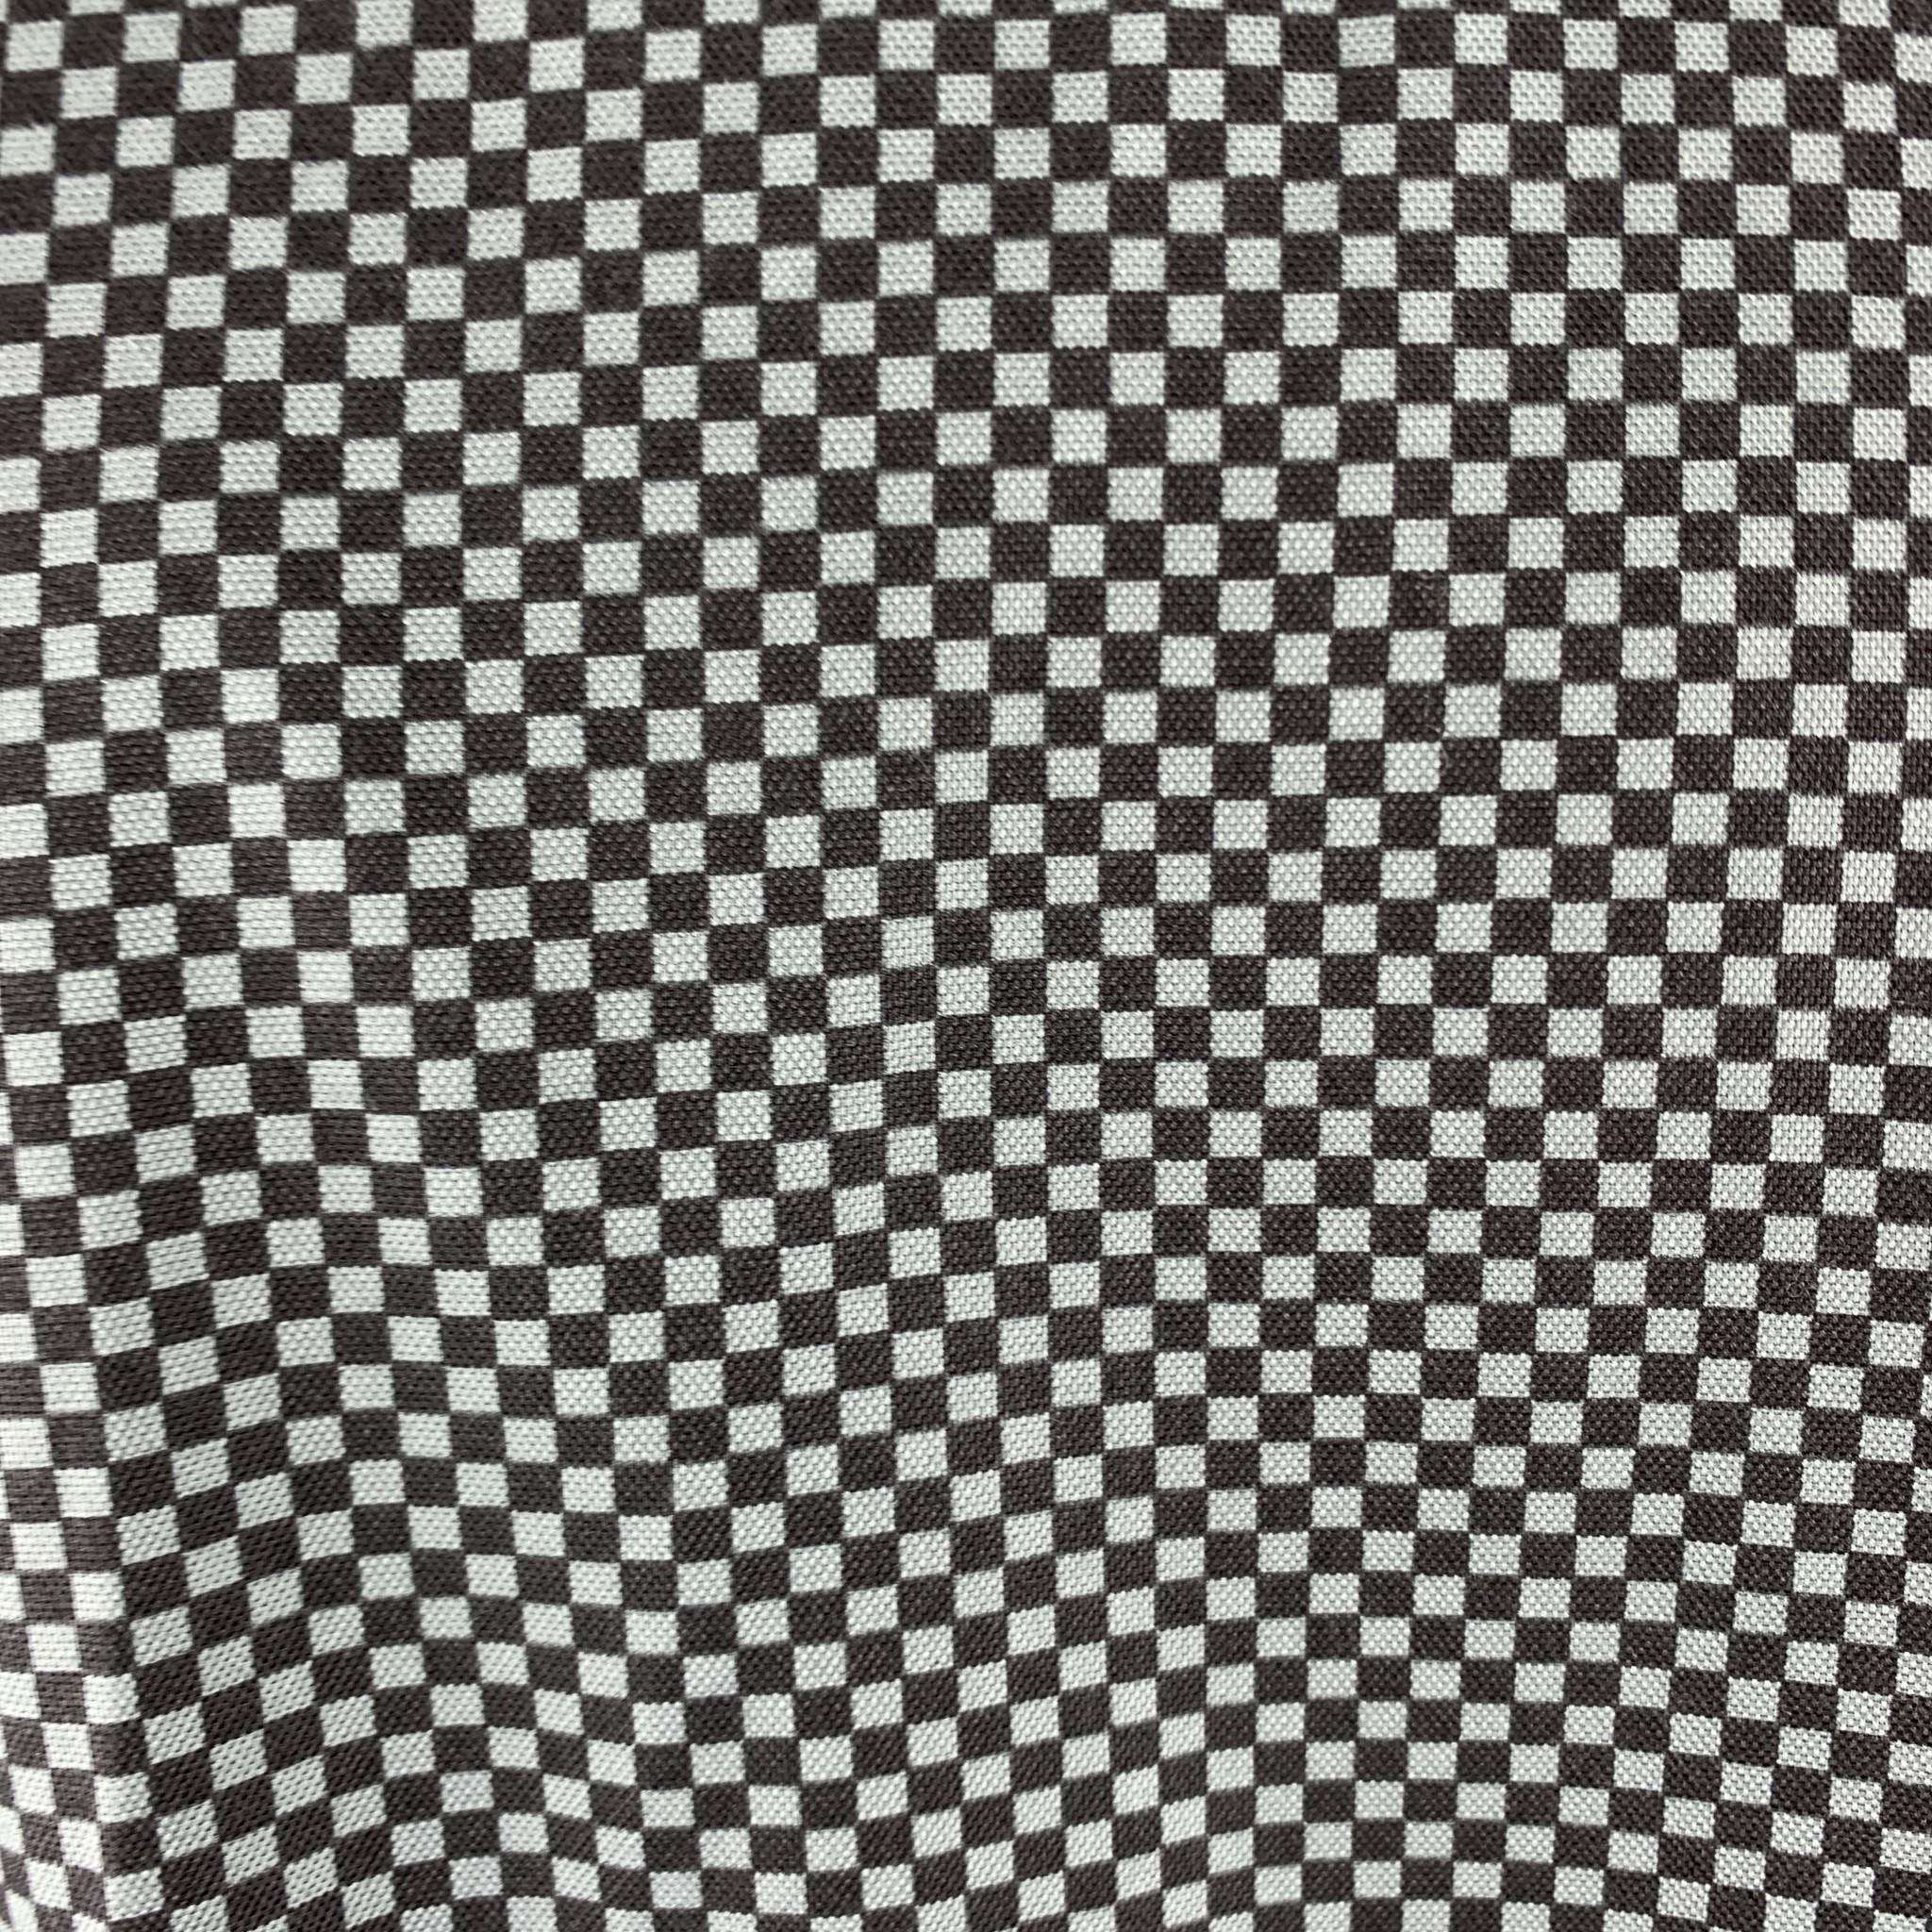 MARC by MARC JACOBS Size S Gray & Black Checkered Cotton Long Sleeve Shirt 1